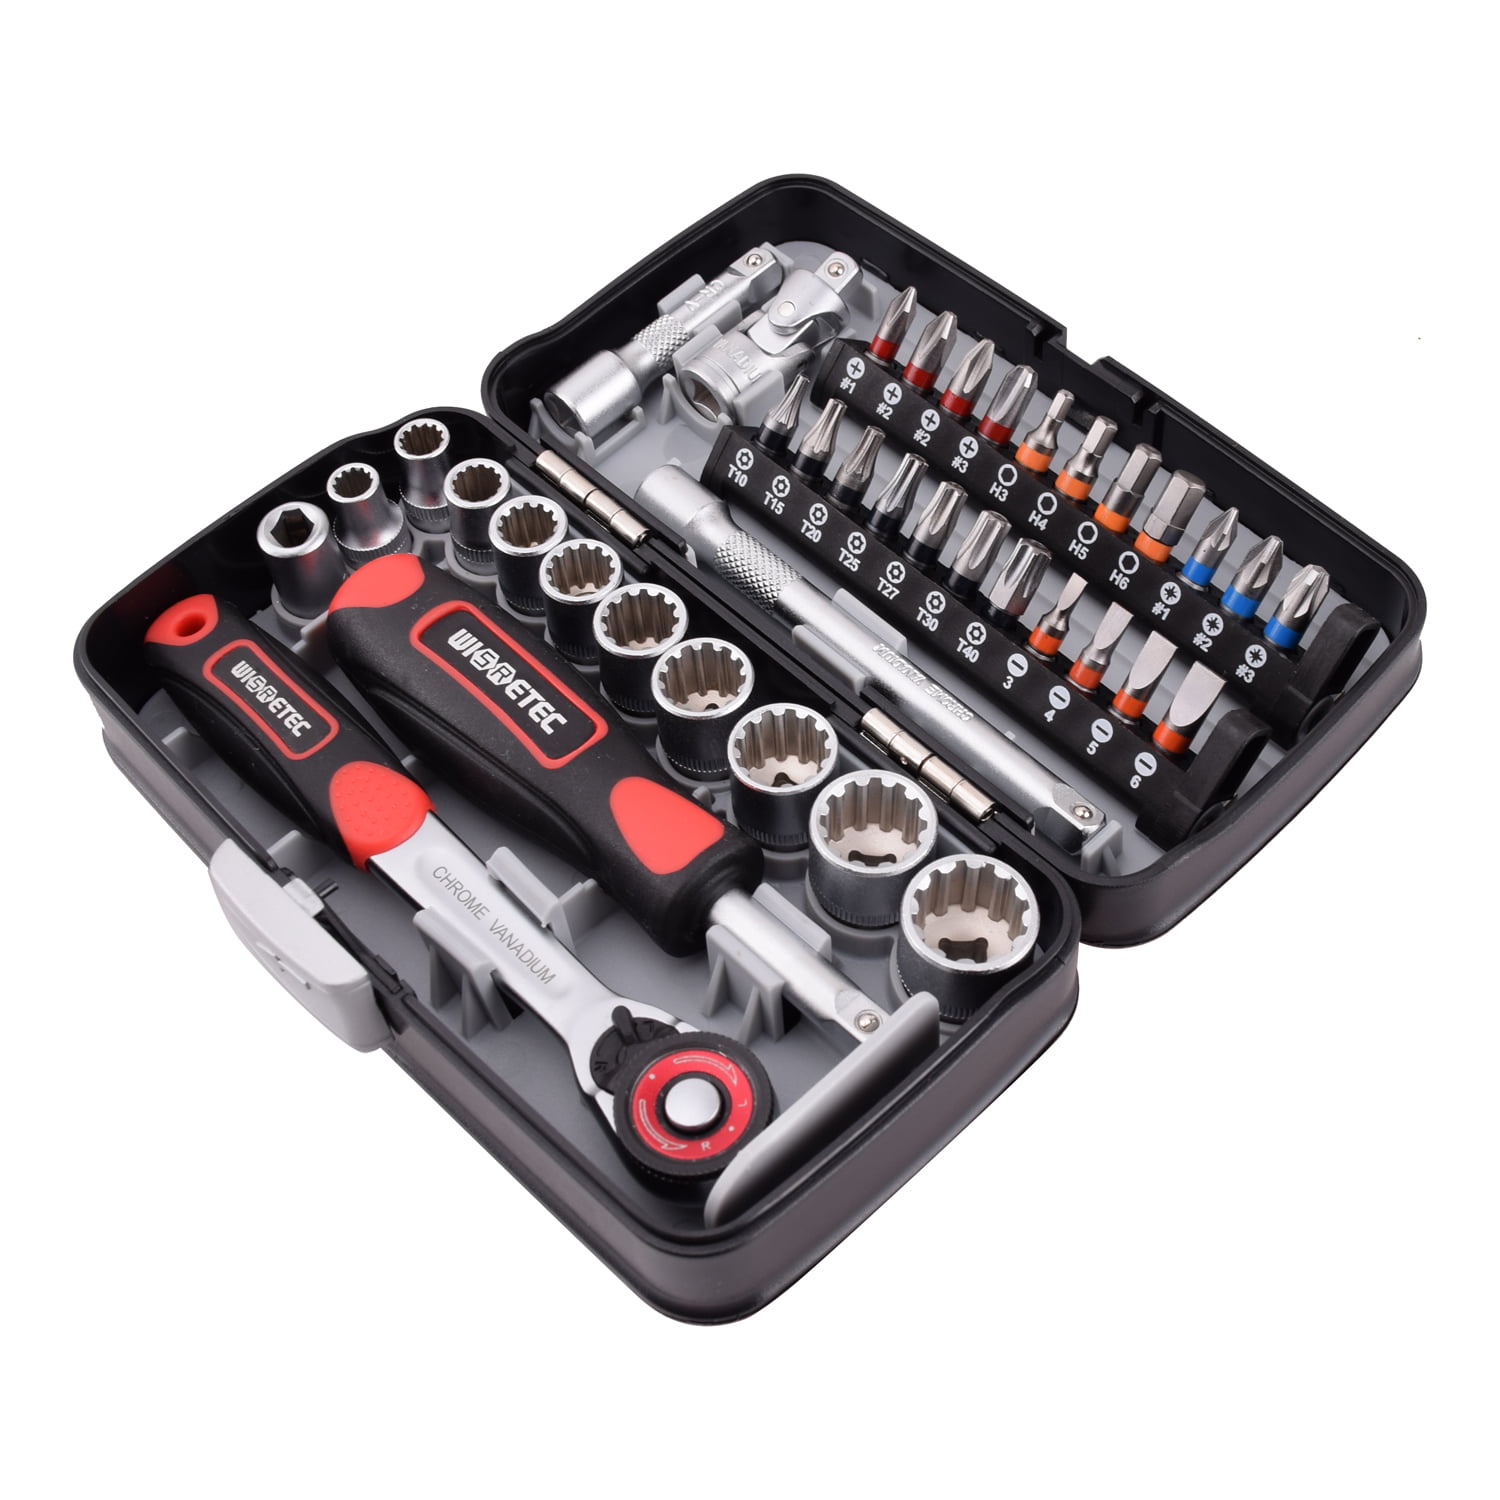 38pcs Mini Portable Precise Ratchet Wrench Sleeve Set Practical Bicycle Requiring Tool Kit Suuonee Ratchet Wrench Kit 